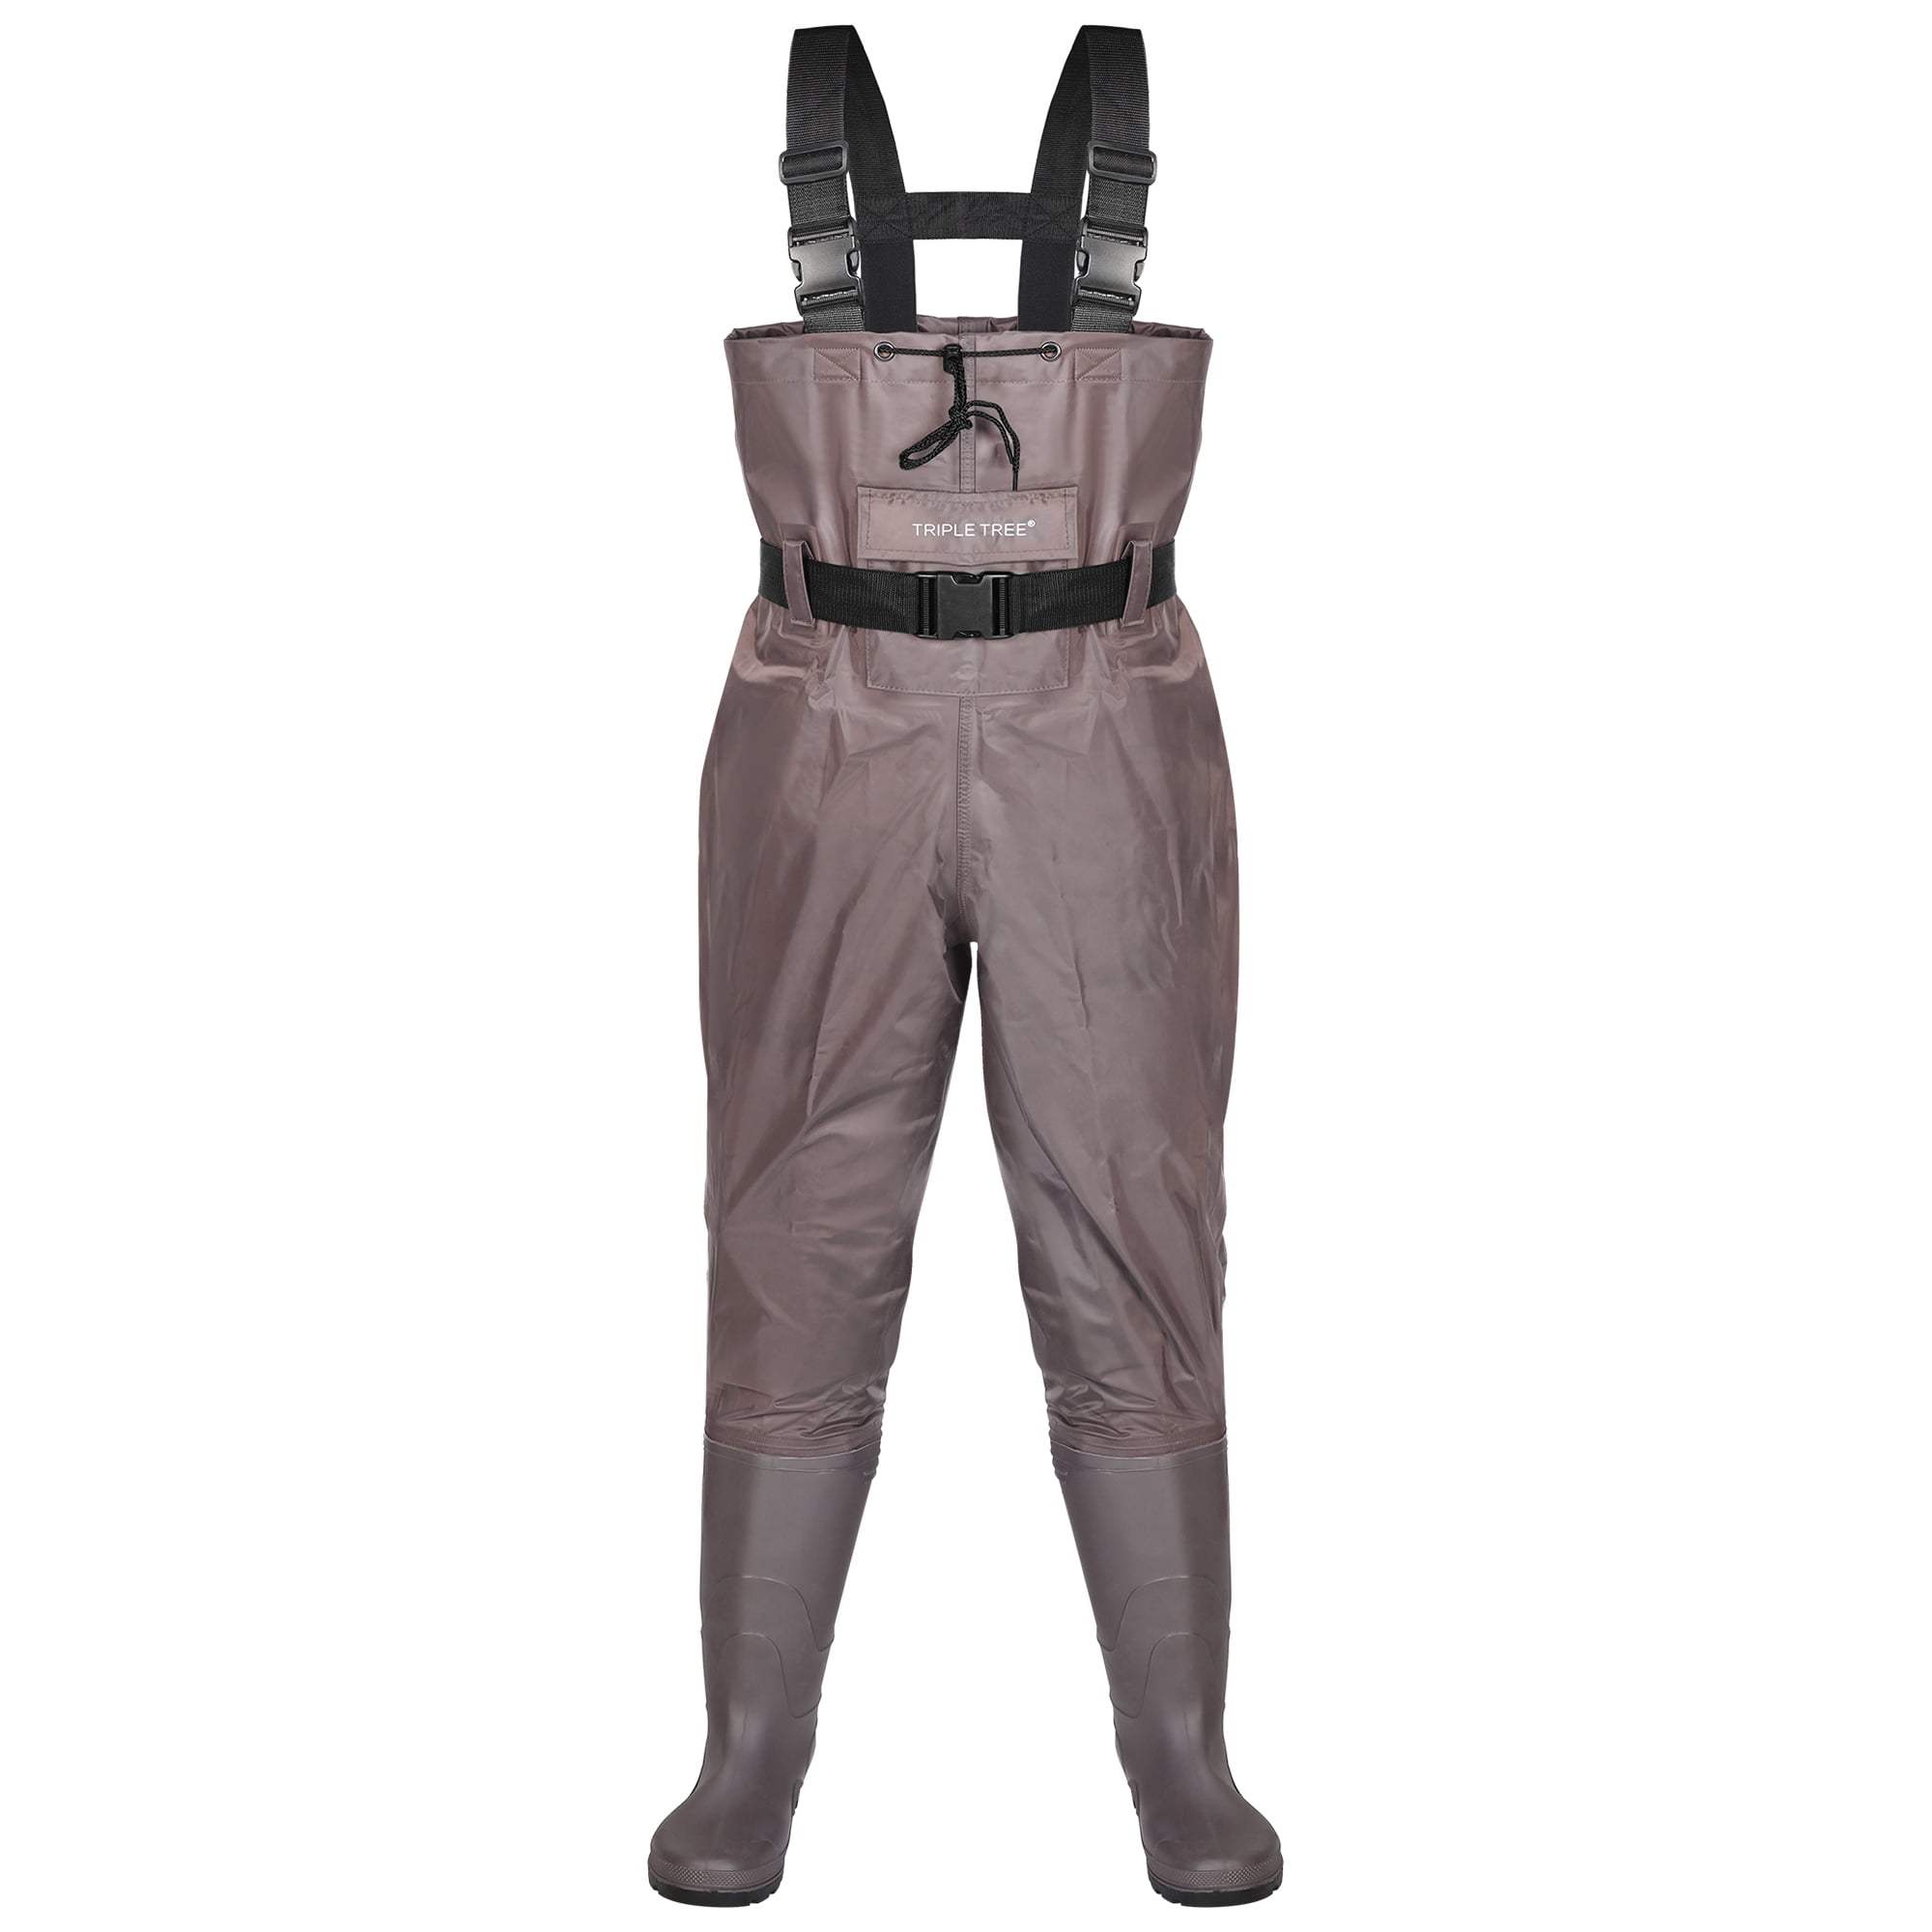 NYLON CHEST WADERS SIZES 7 8 9 10 11 0R 12 BISON PVC 